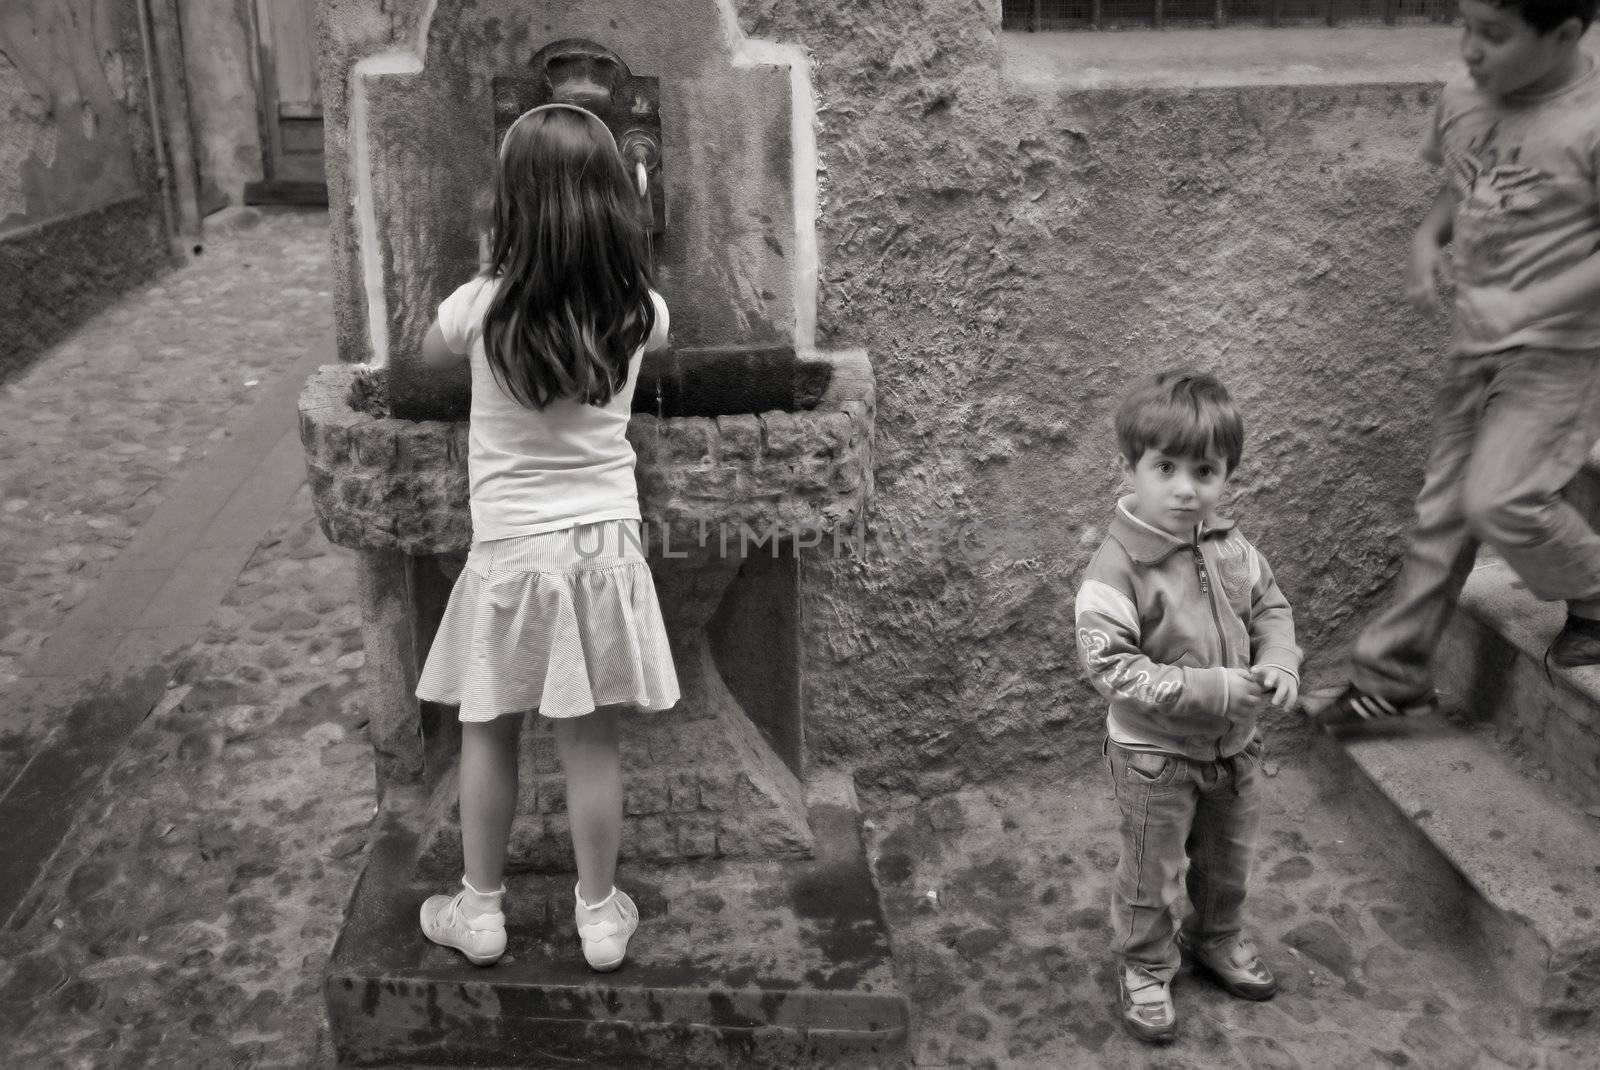 ACTIVE CHILDREN IN ALLEY, LONGOBUCCO, ITALY, SEPTEMBER 15 - 2011:  Kids in a narrow alley in the mountain village Longobucco, Calabria - Italy. Monochrome image - soft focus.